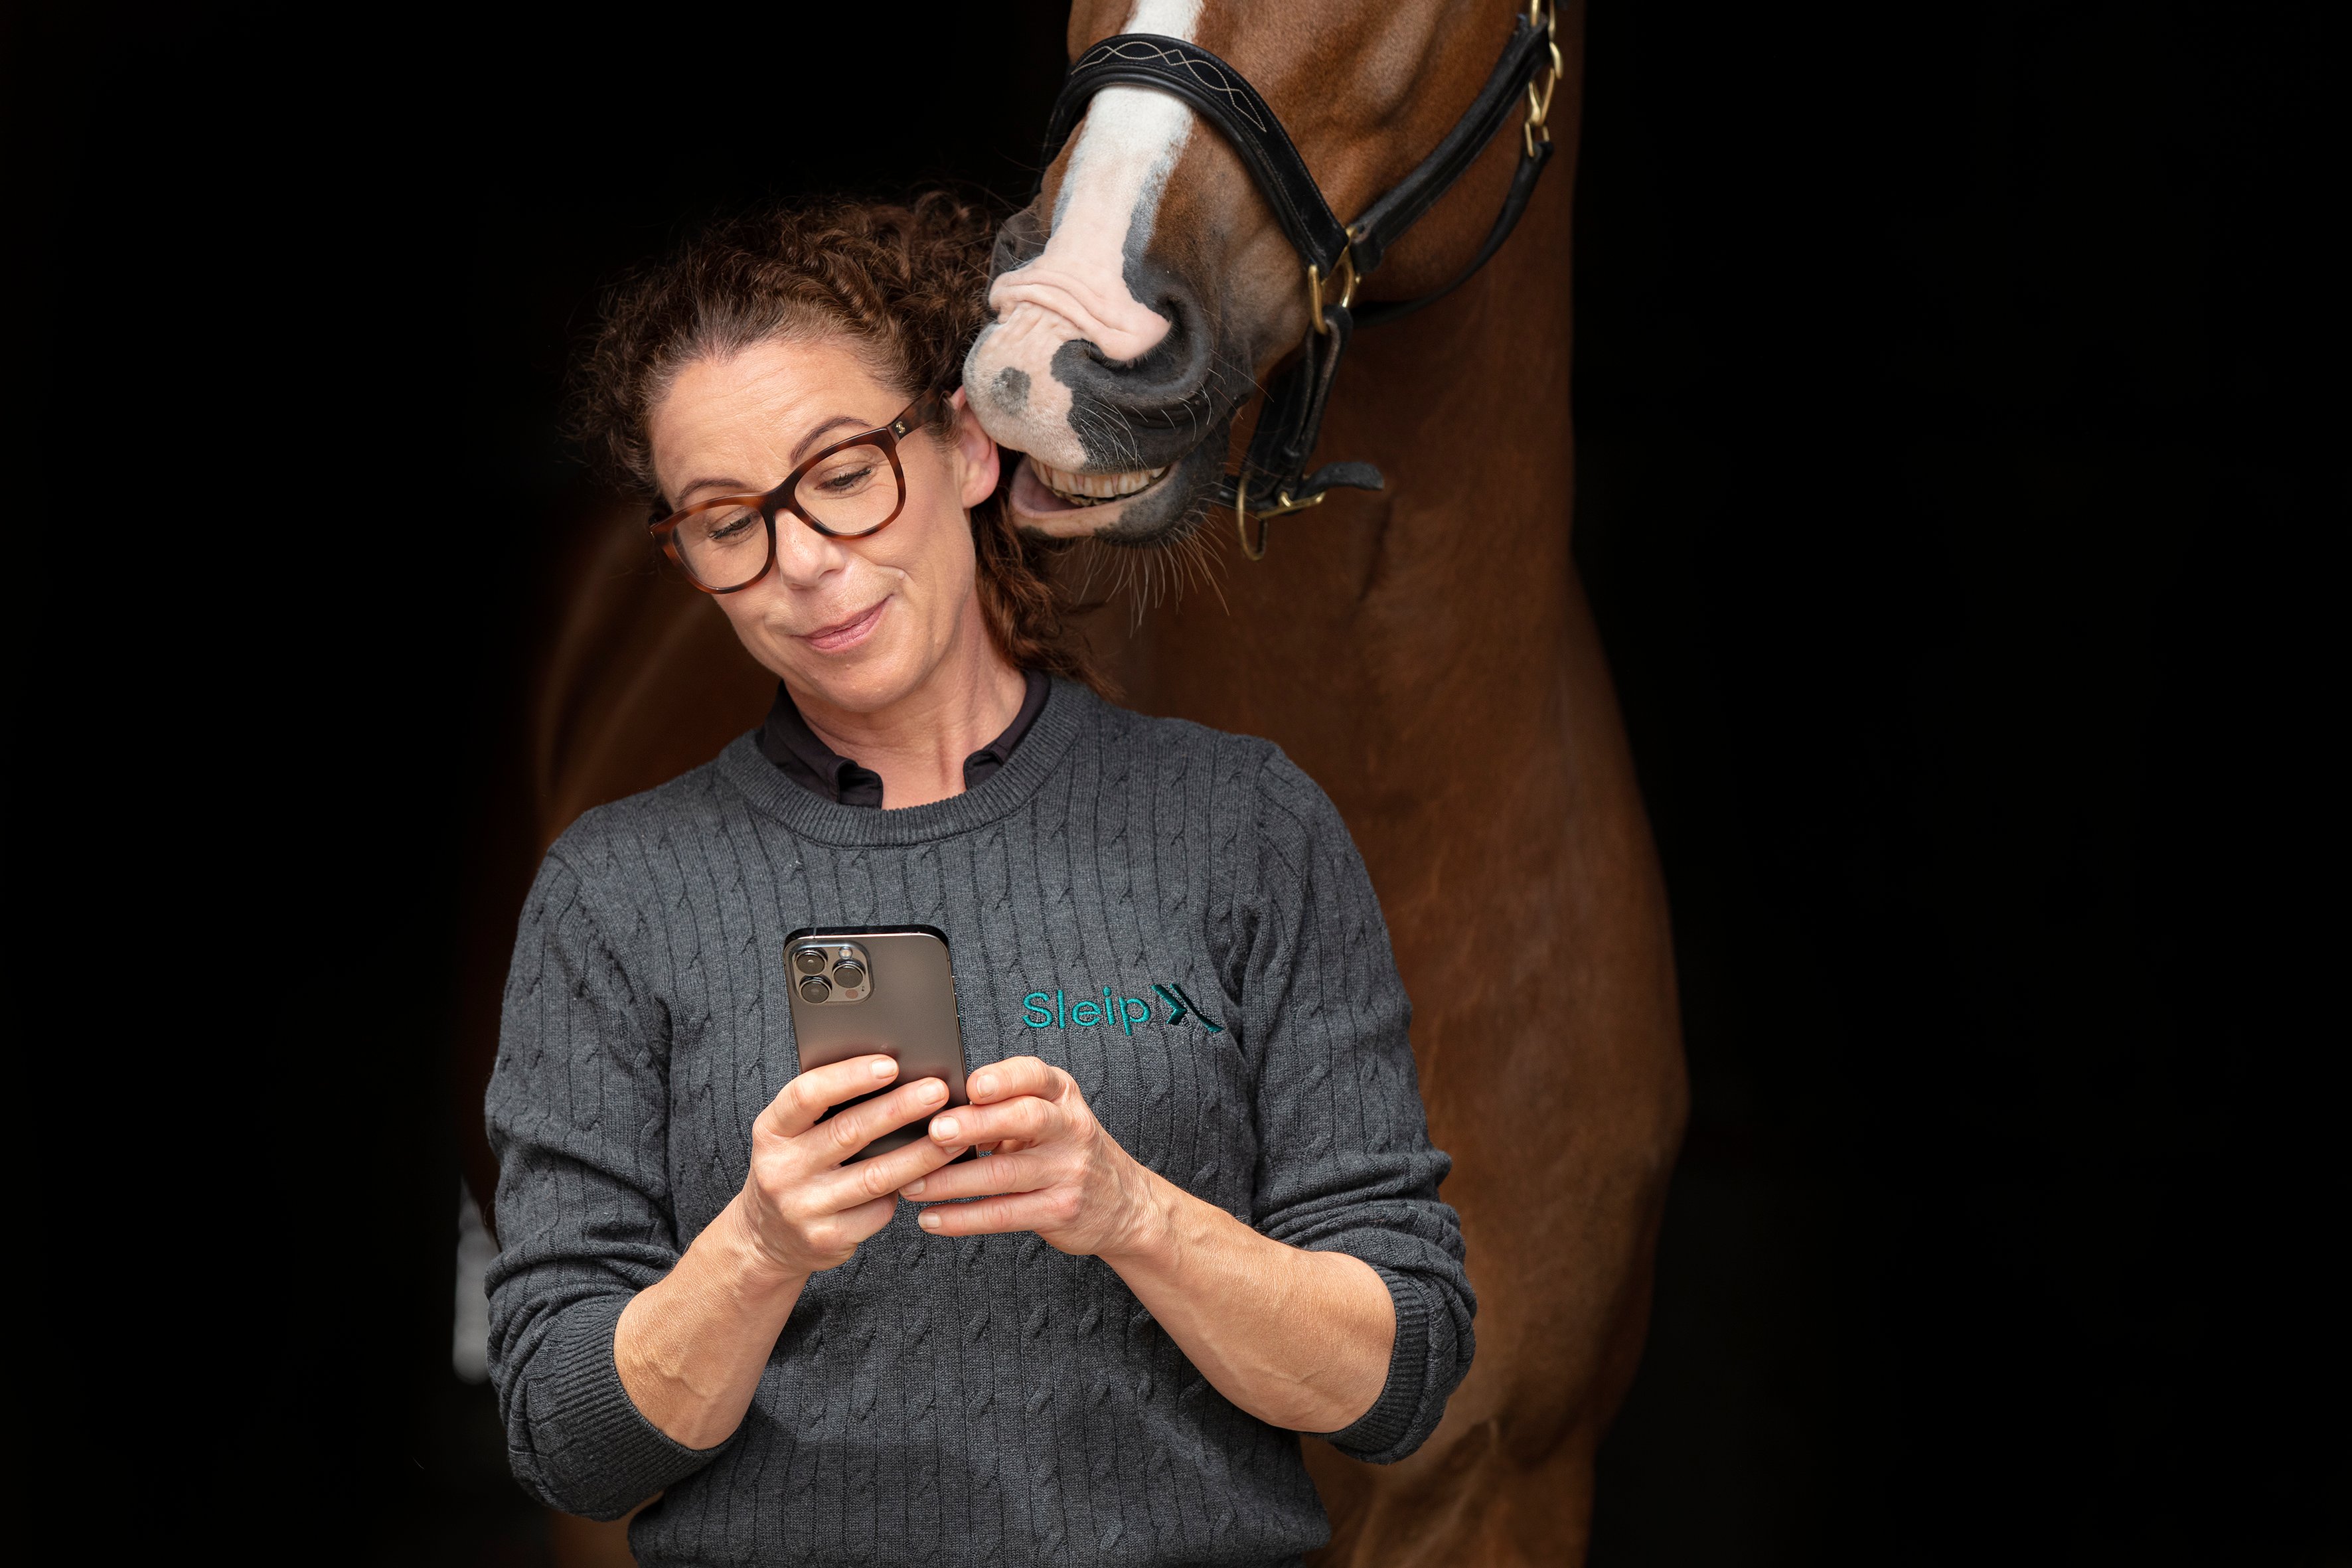 the woman in front of the horse, holding an iPhone